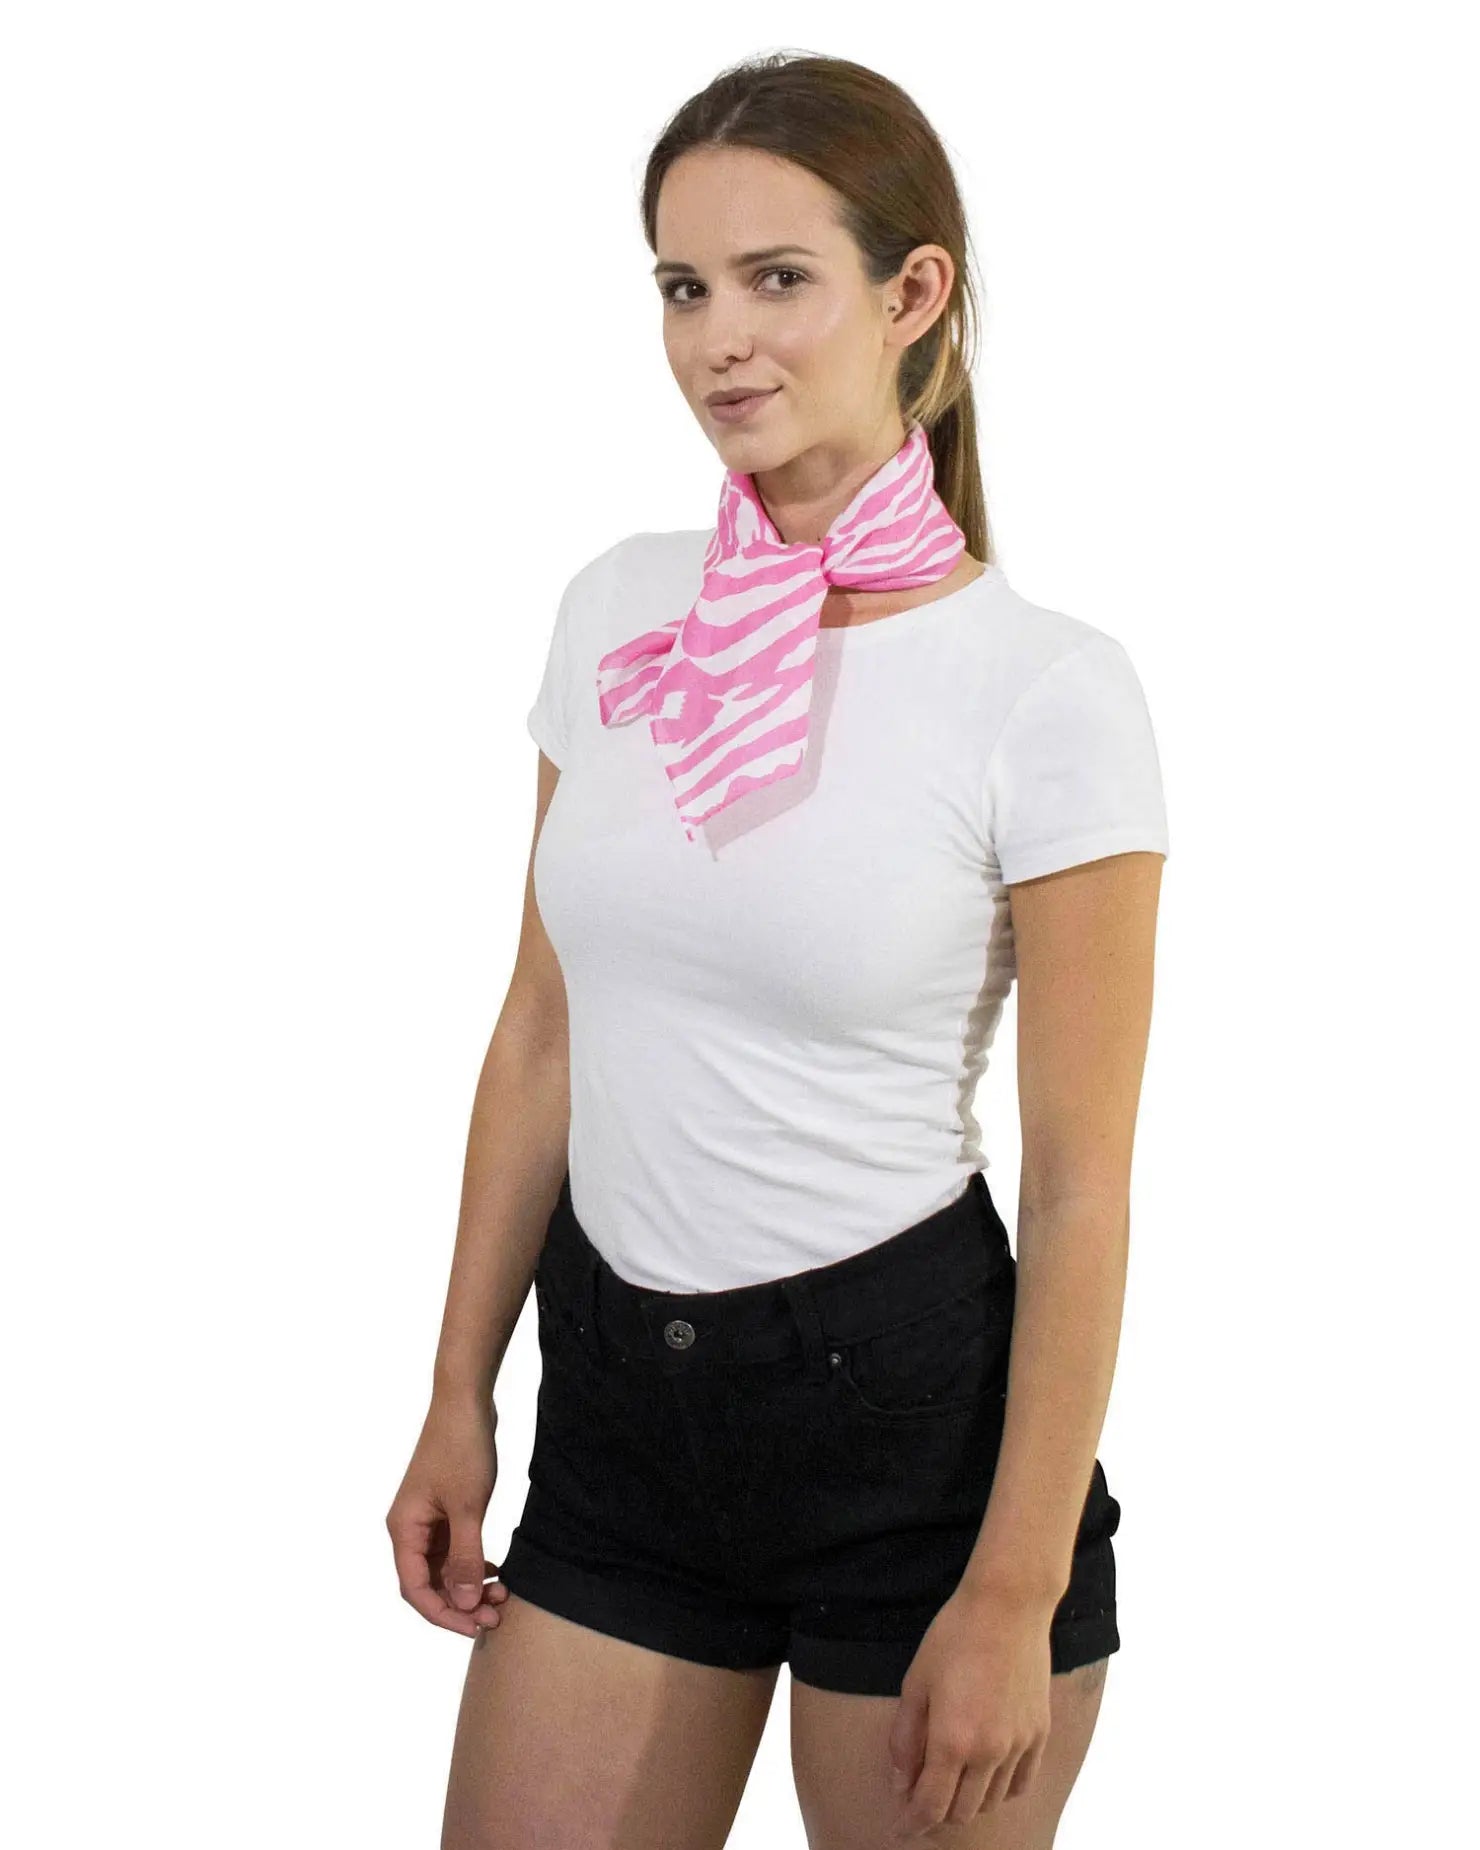 Zebra print multifunctional square bandana worn by woman in pink and white striped scarf